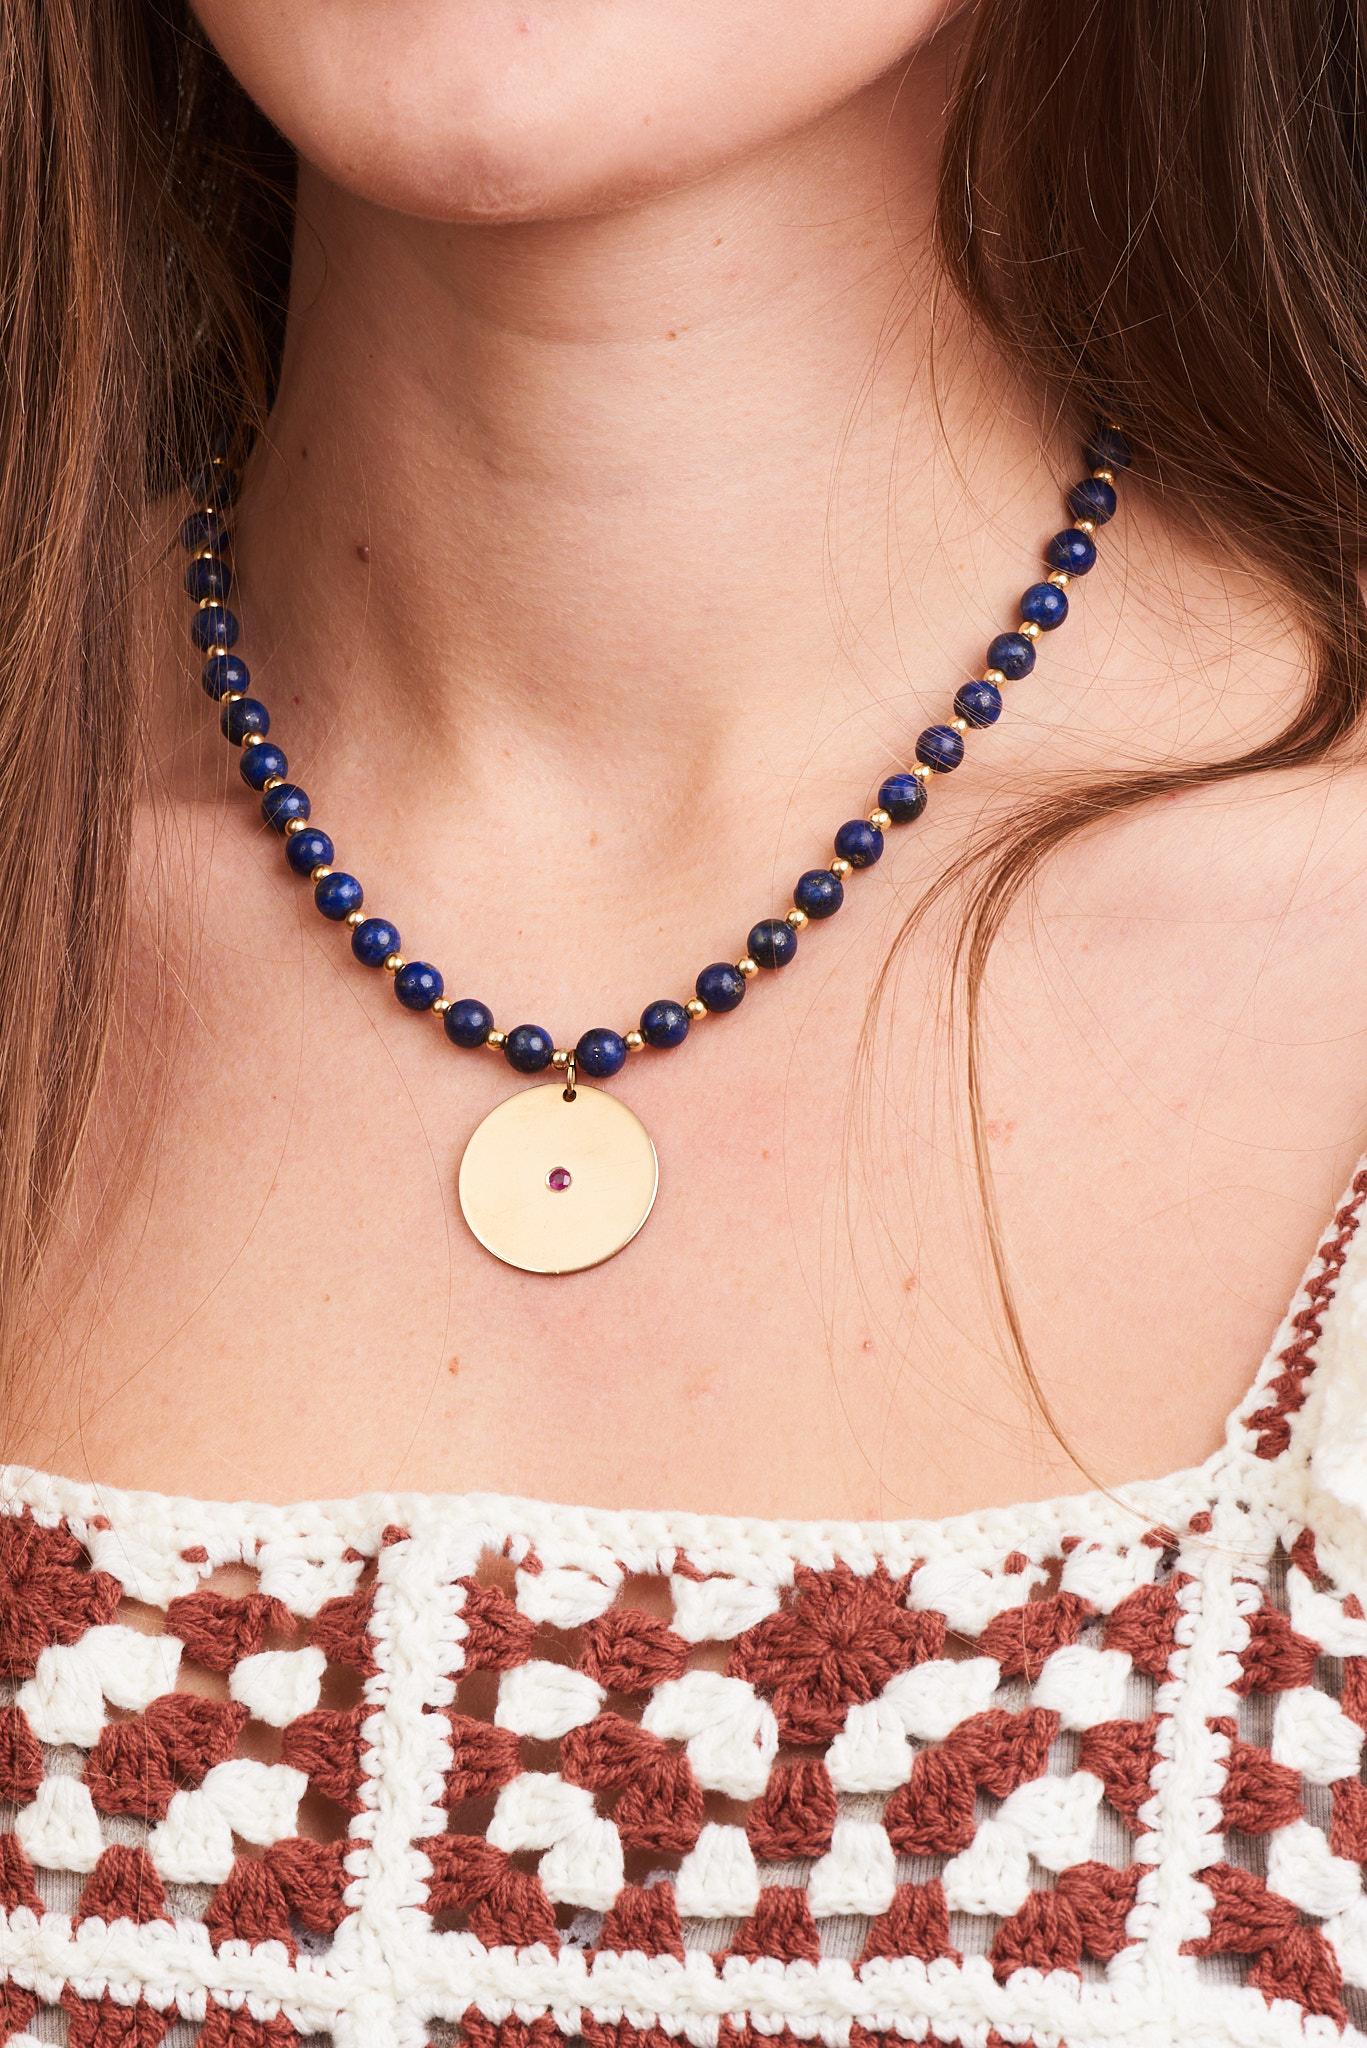 A chain of deep blue lapis stones and 3mm solid gold beads are paired with a 14k Yellow Gold Disk with a 3mm black diamond in the center.

-14k Yellow Gold
-pendent is 24mm in diameter
-52, 6mm genuine lapis stones (drilled through)
-48, 3mm 14k